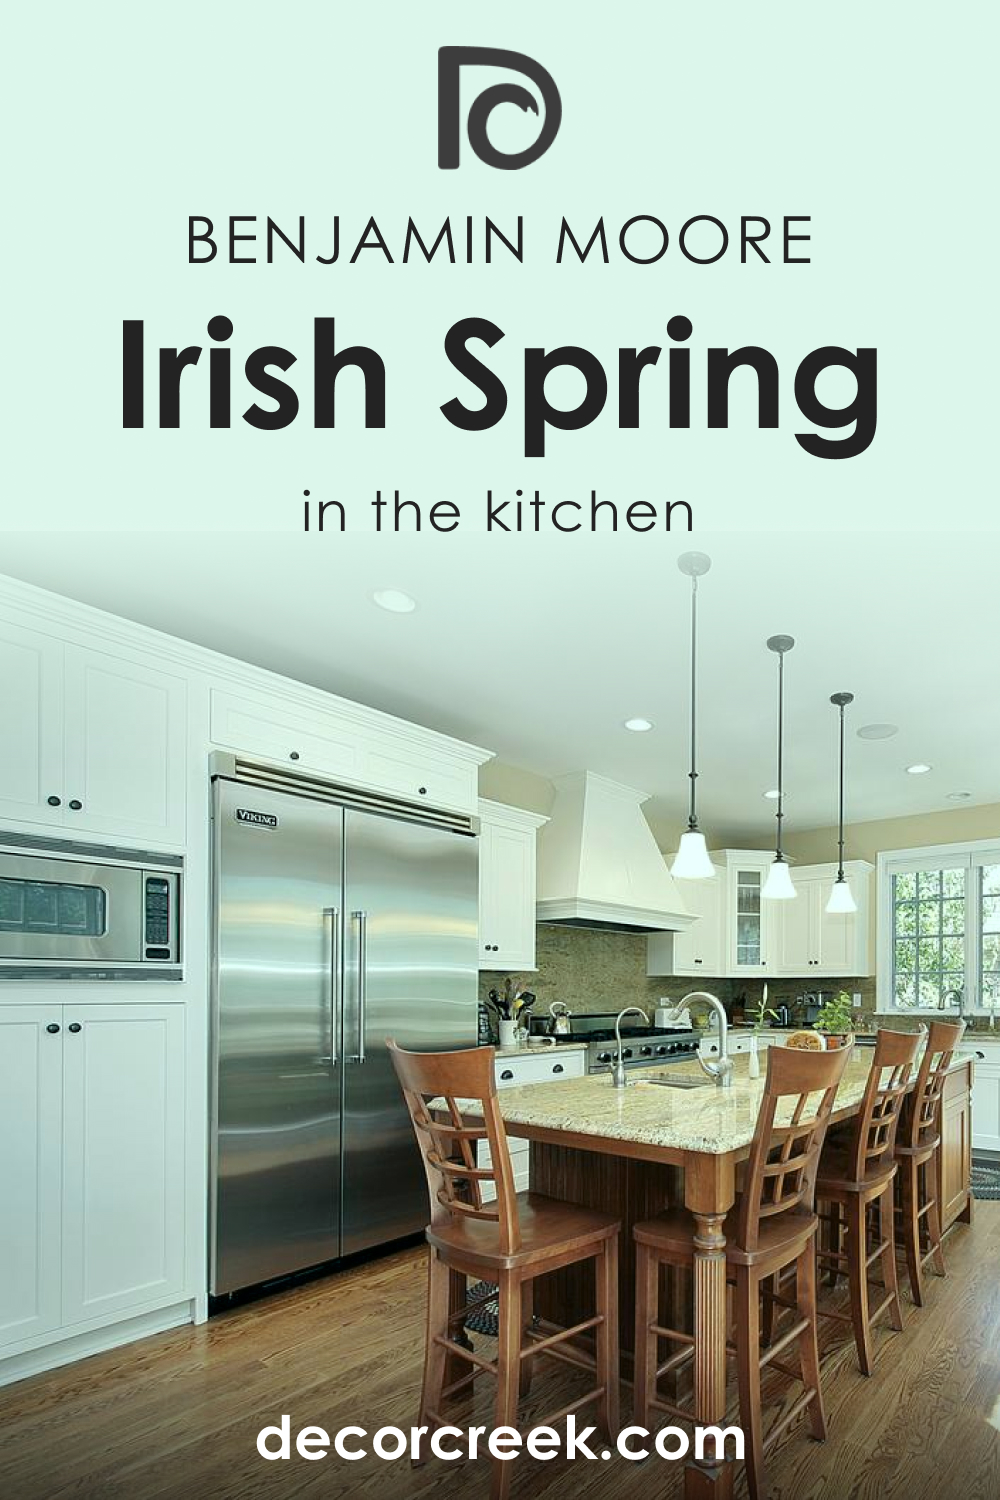 How to Use Irish Spring 2038-70 in the Kitchen